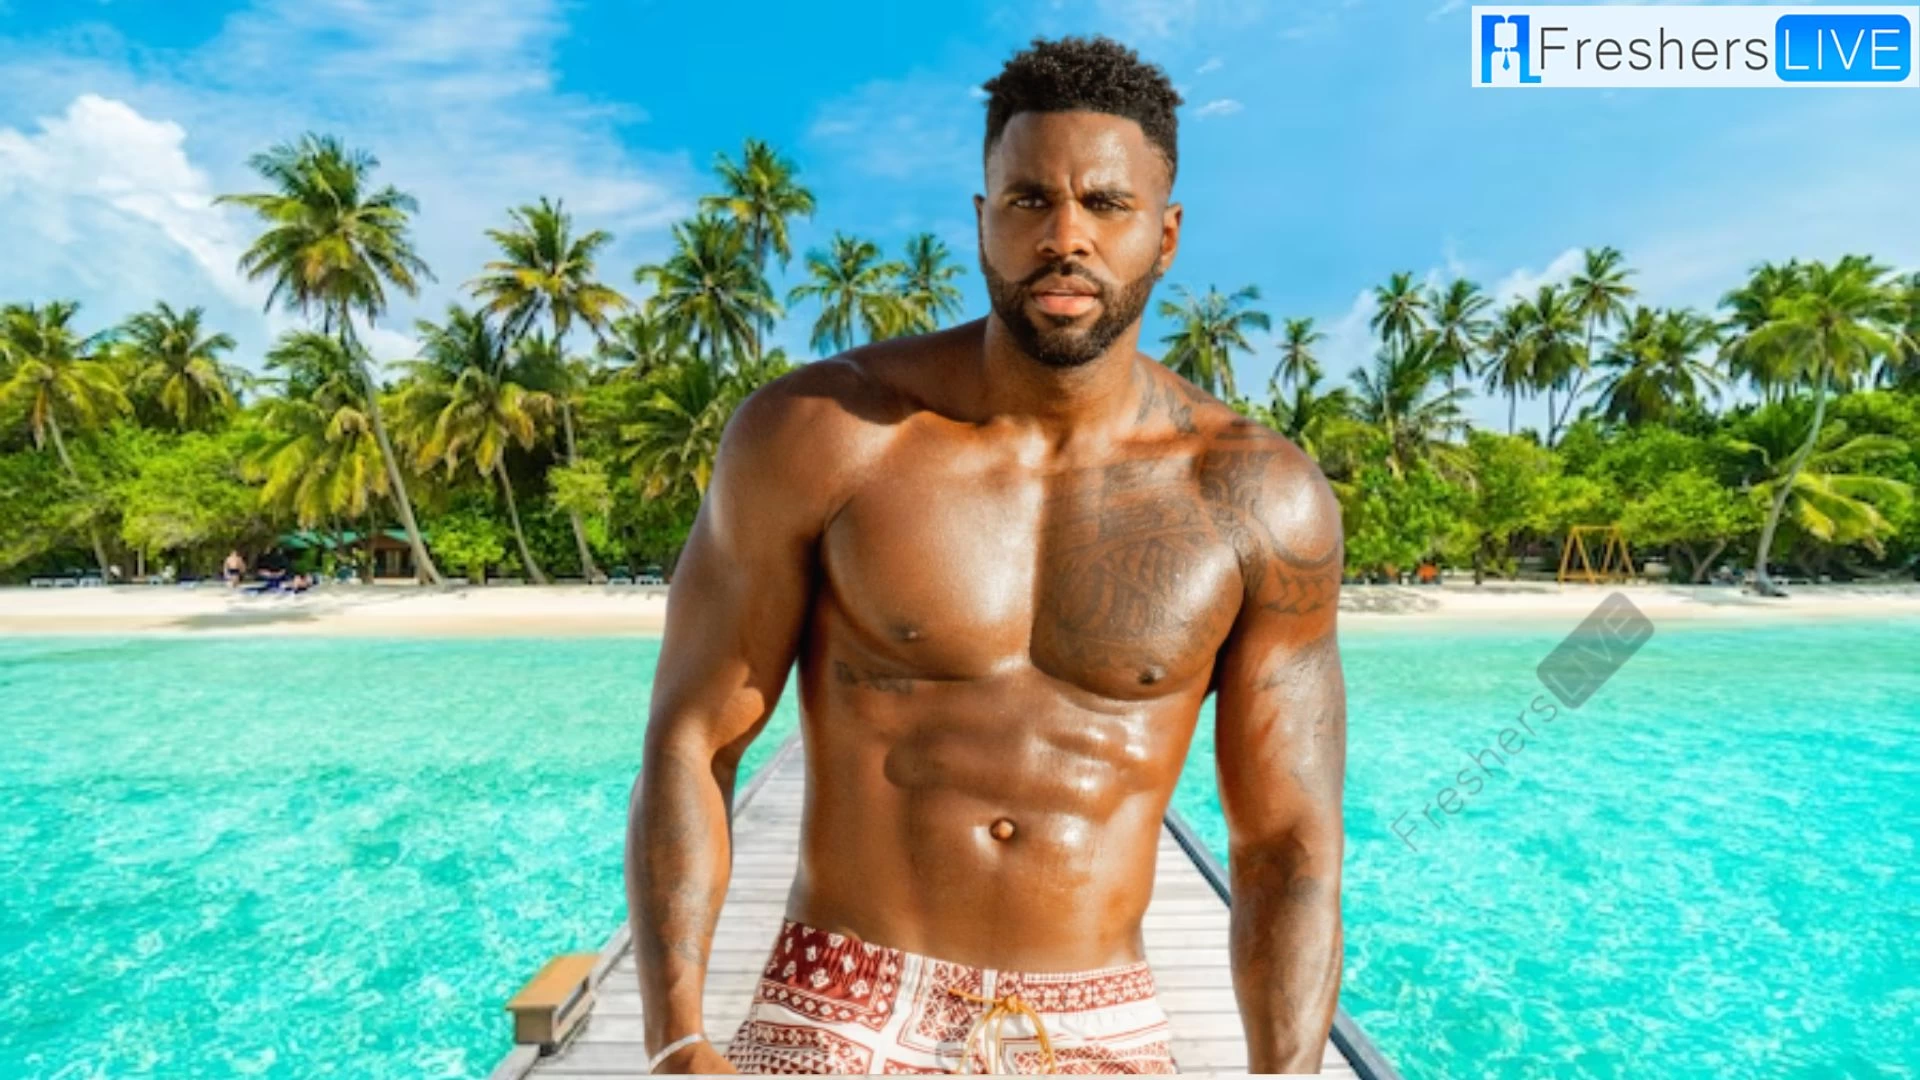 Does Jason Derulo Have Kids? Who is Jason Derulo? Jason Derulo's Age, Family, Parents and More